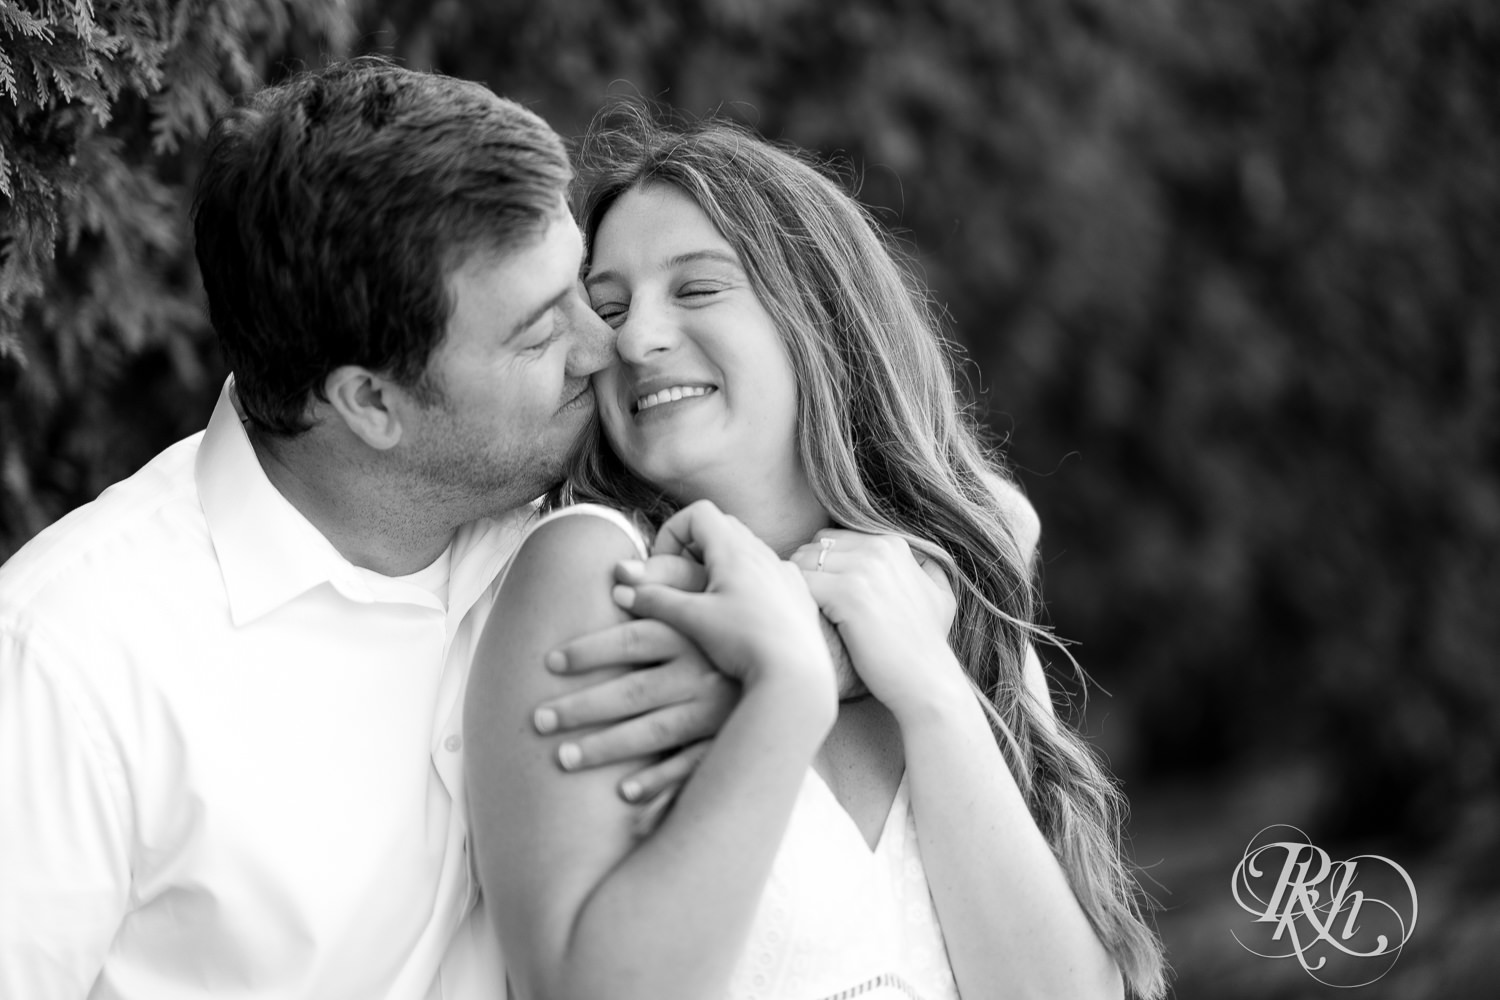 Man and woman in white dress snuggle during engagement photography at Centennial Lakes Park in Edina, Minnesota.